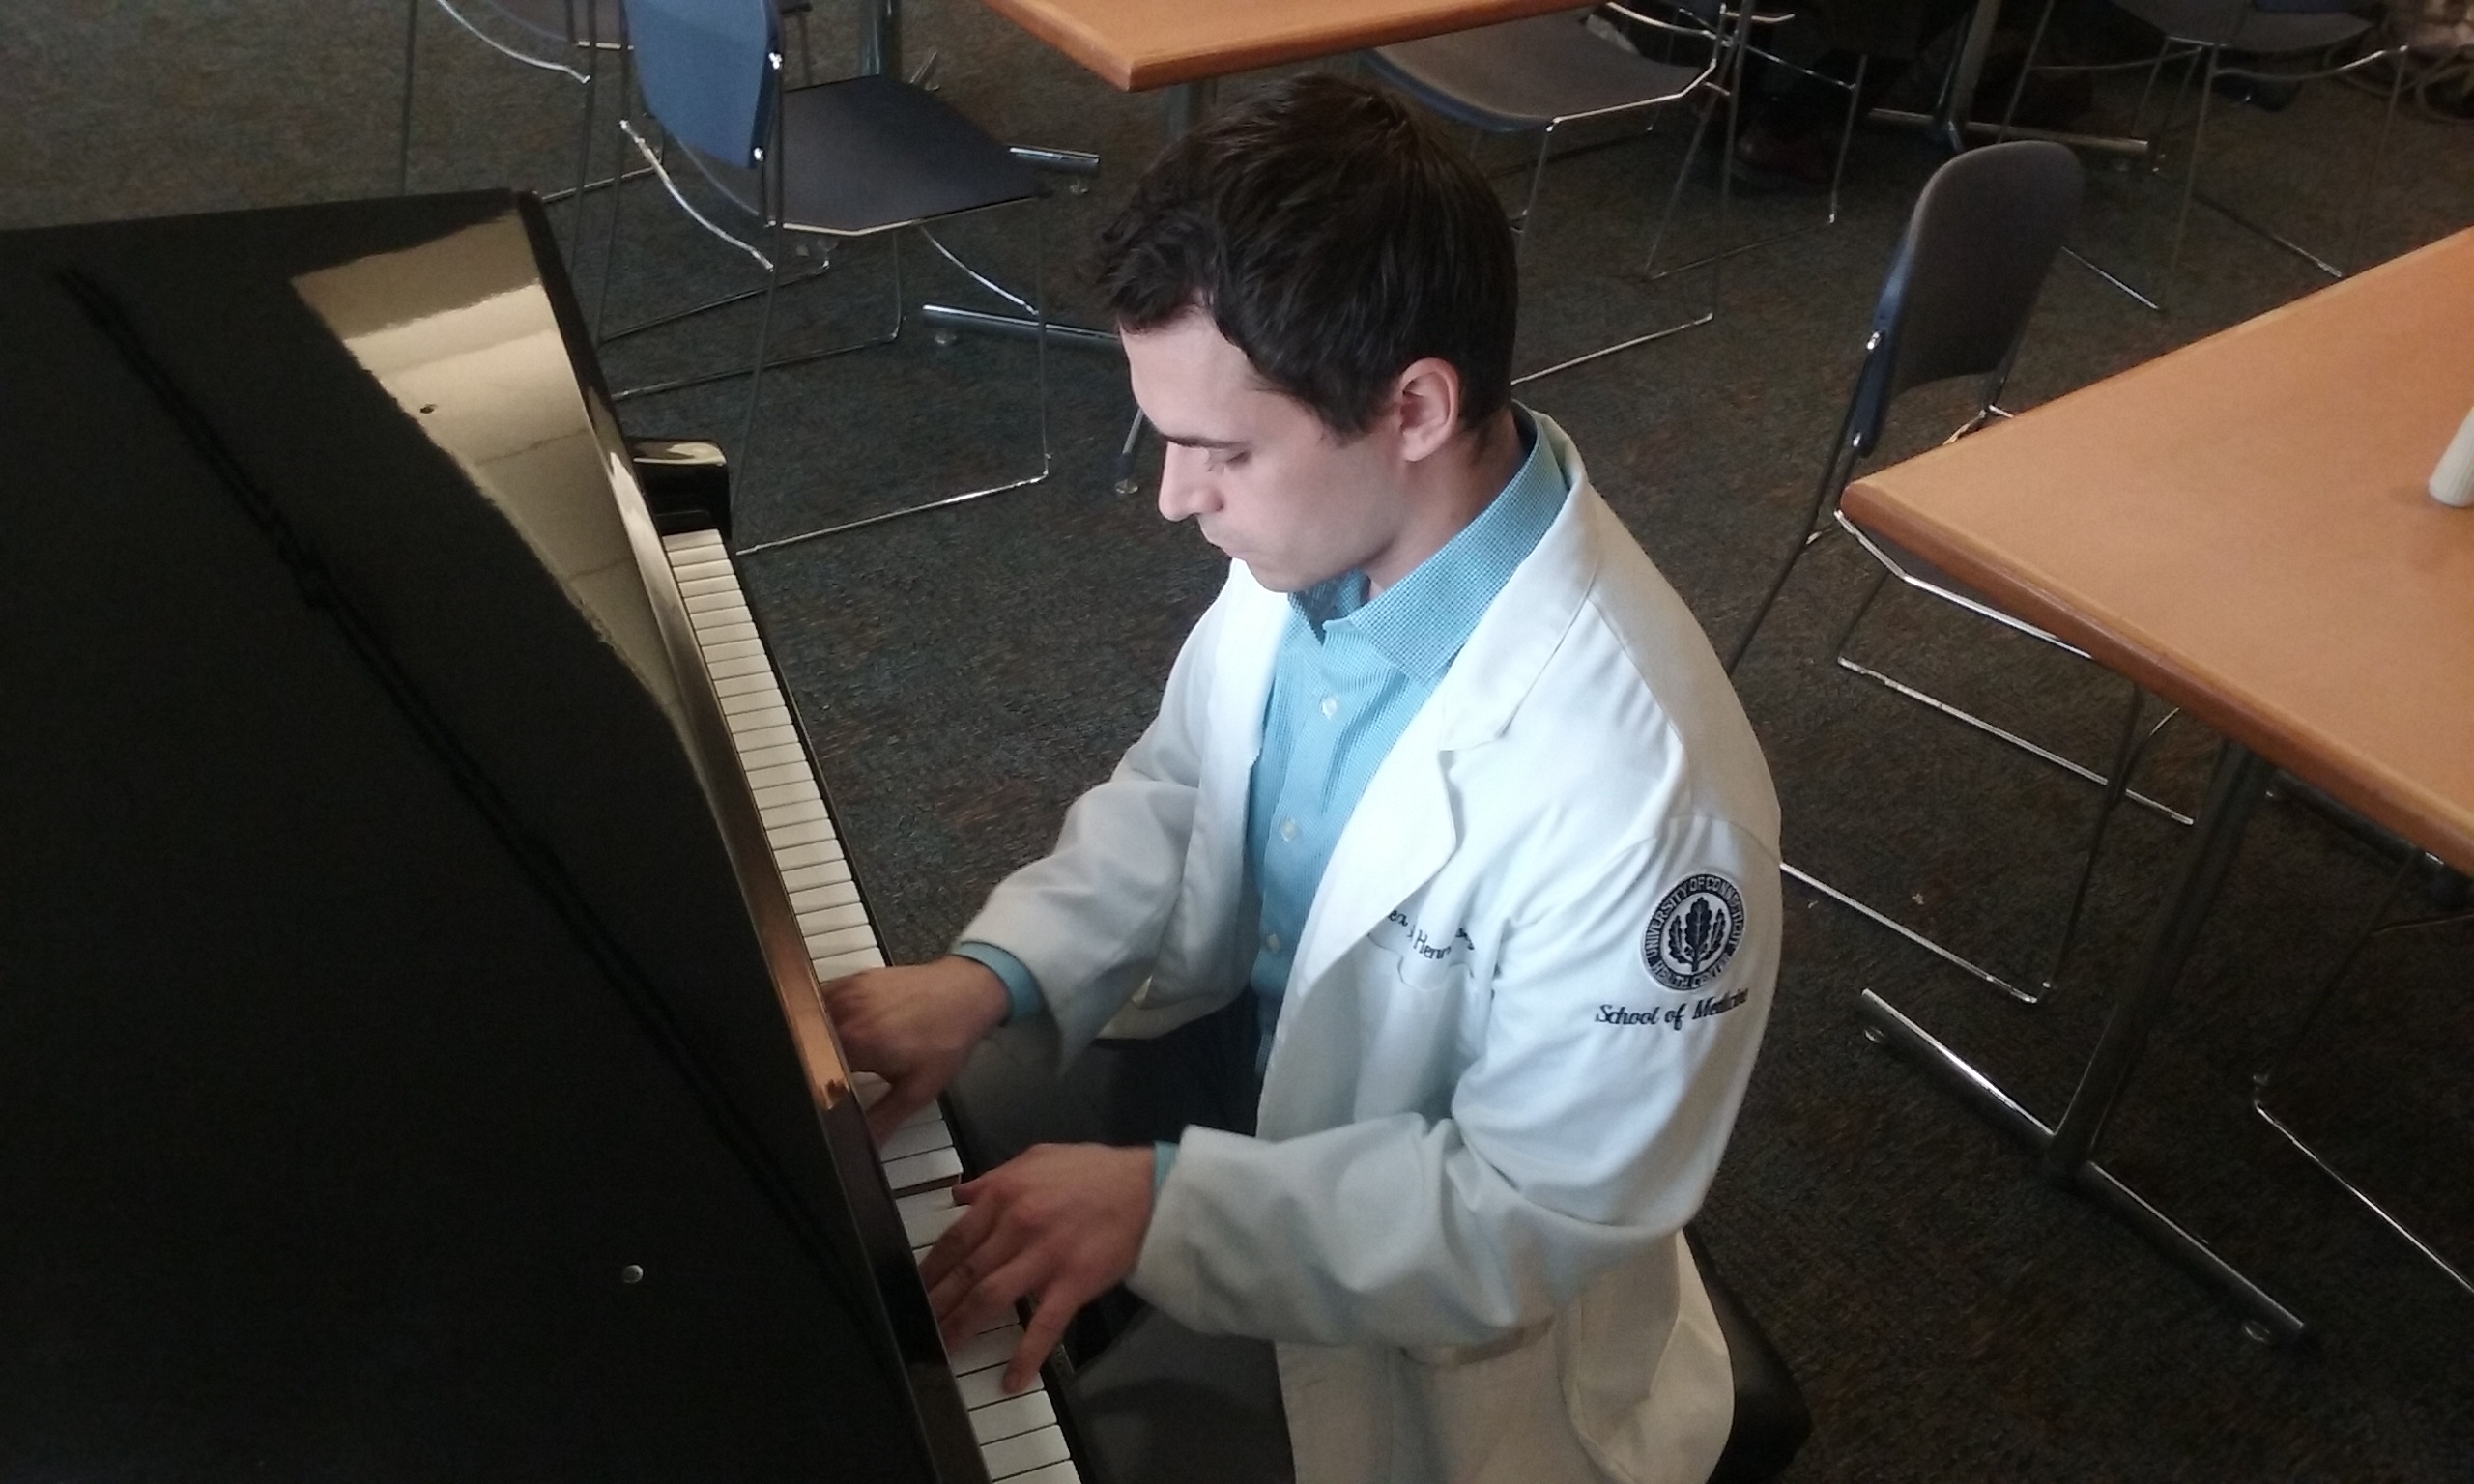 Alex Hennessey is trained in both music and medicine. (Photo by Chris DeFrancesco)